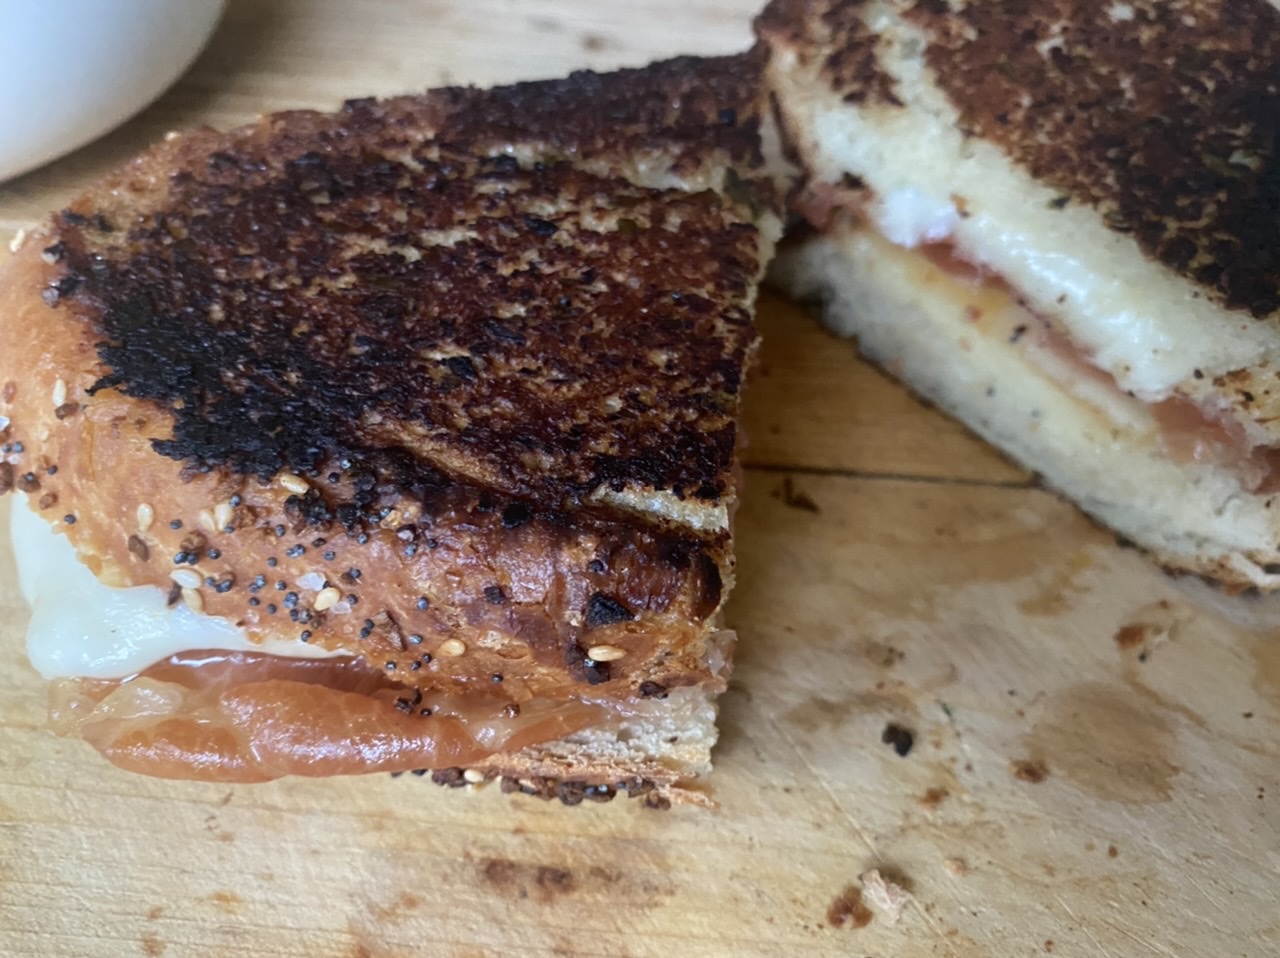 D4E08F4E 8871 46FD 992F 77C194EBC54F - Ultimate Grilled Cheese with Crispy Prosciutto on Everything Bread